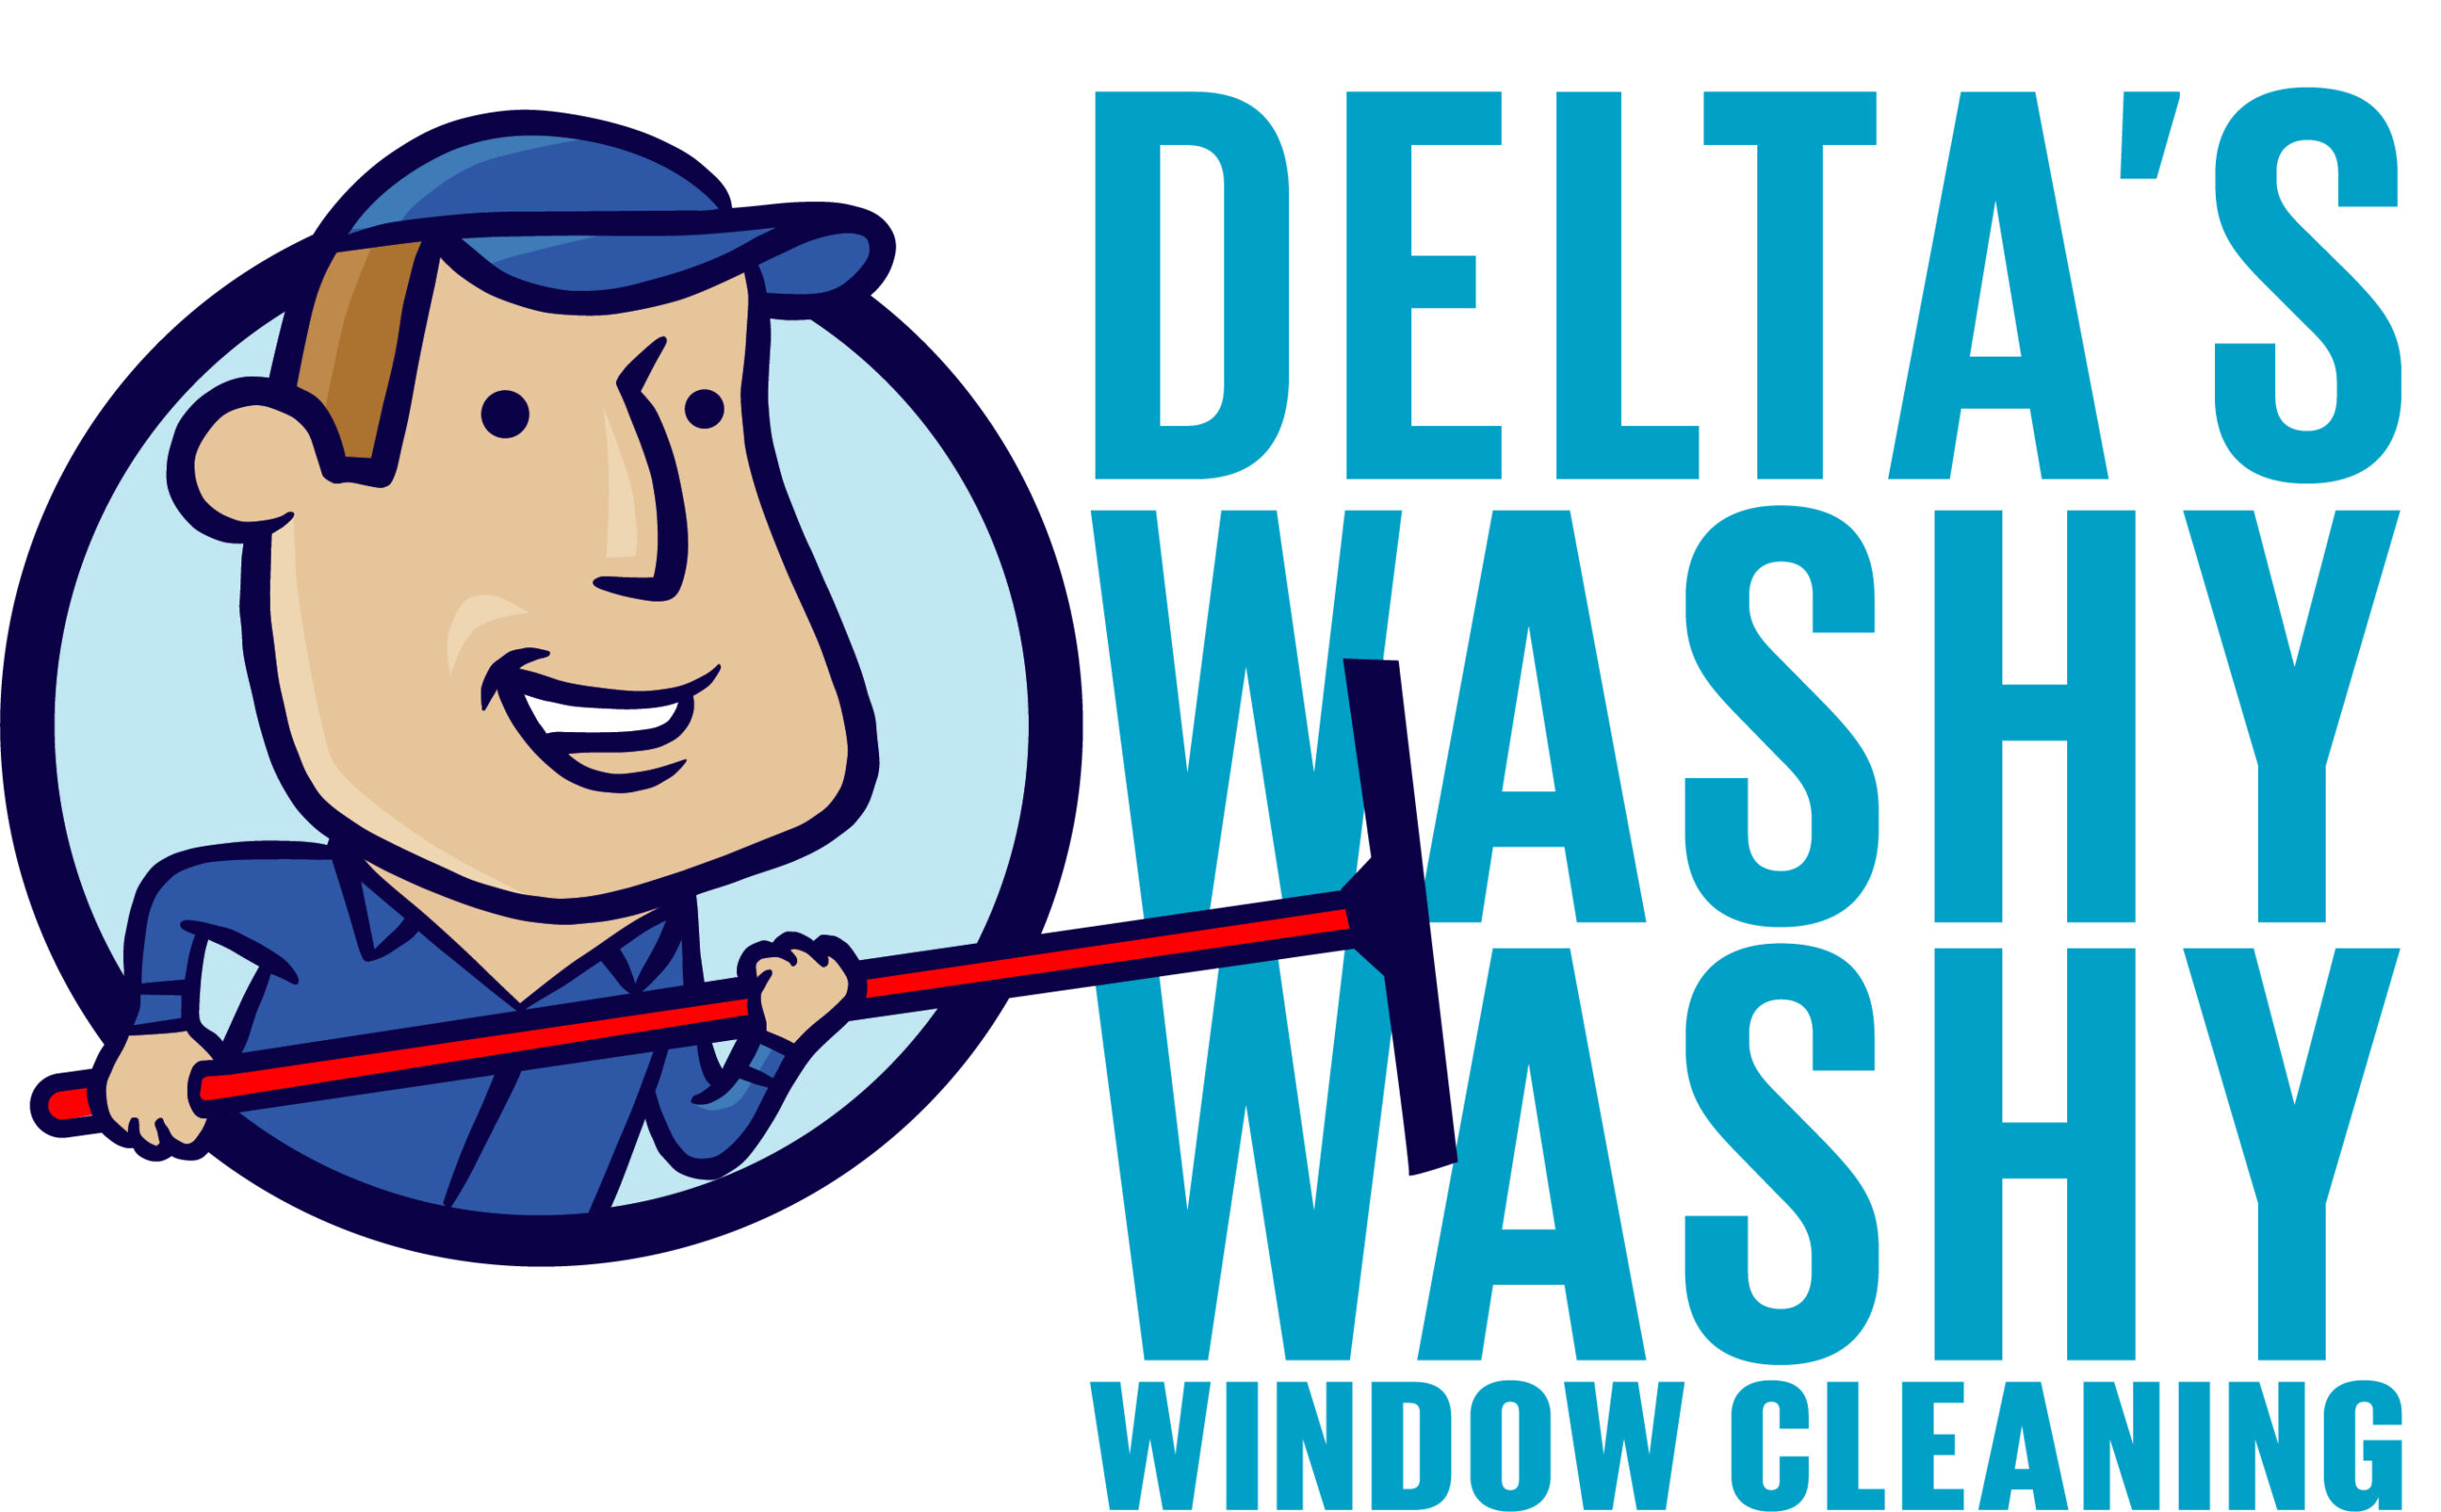 About Washy Washy Window Cleaning Company – Washy Washy Window Cleaning  Company